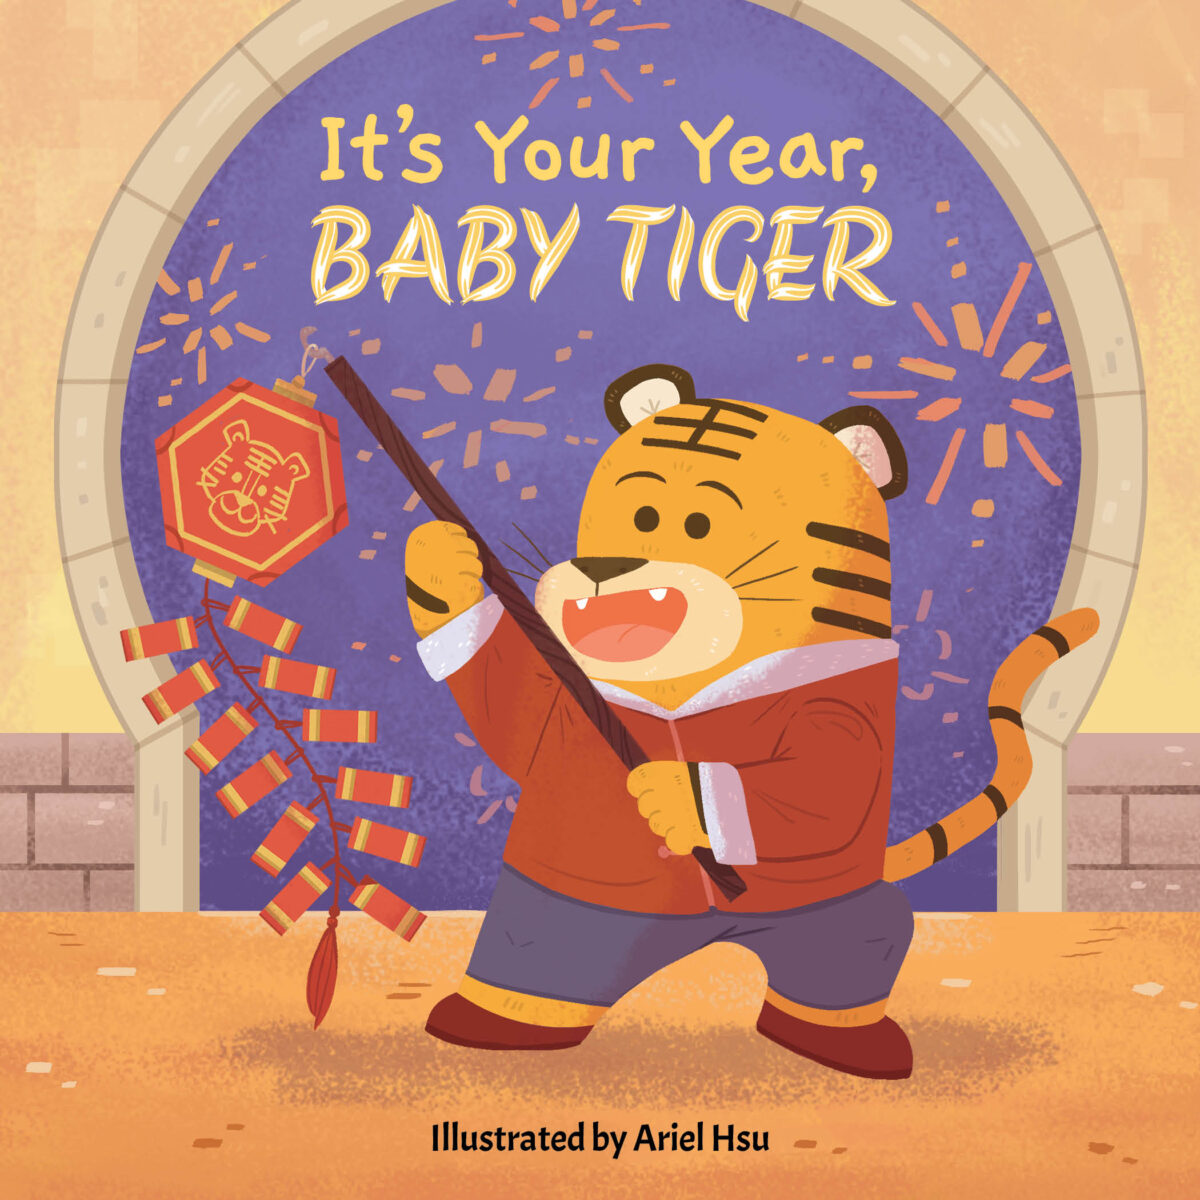 It’s Your Year Baby Tiger